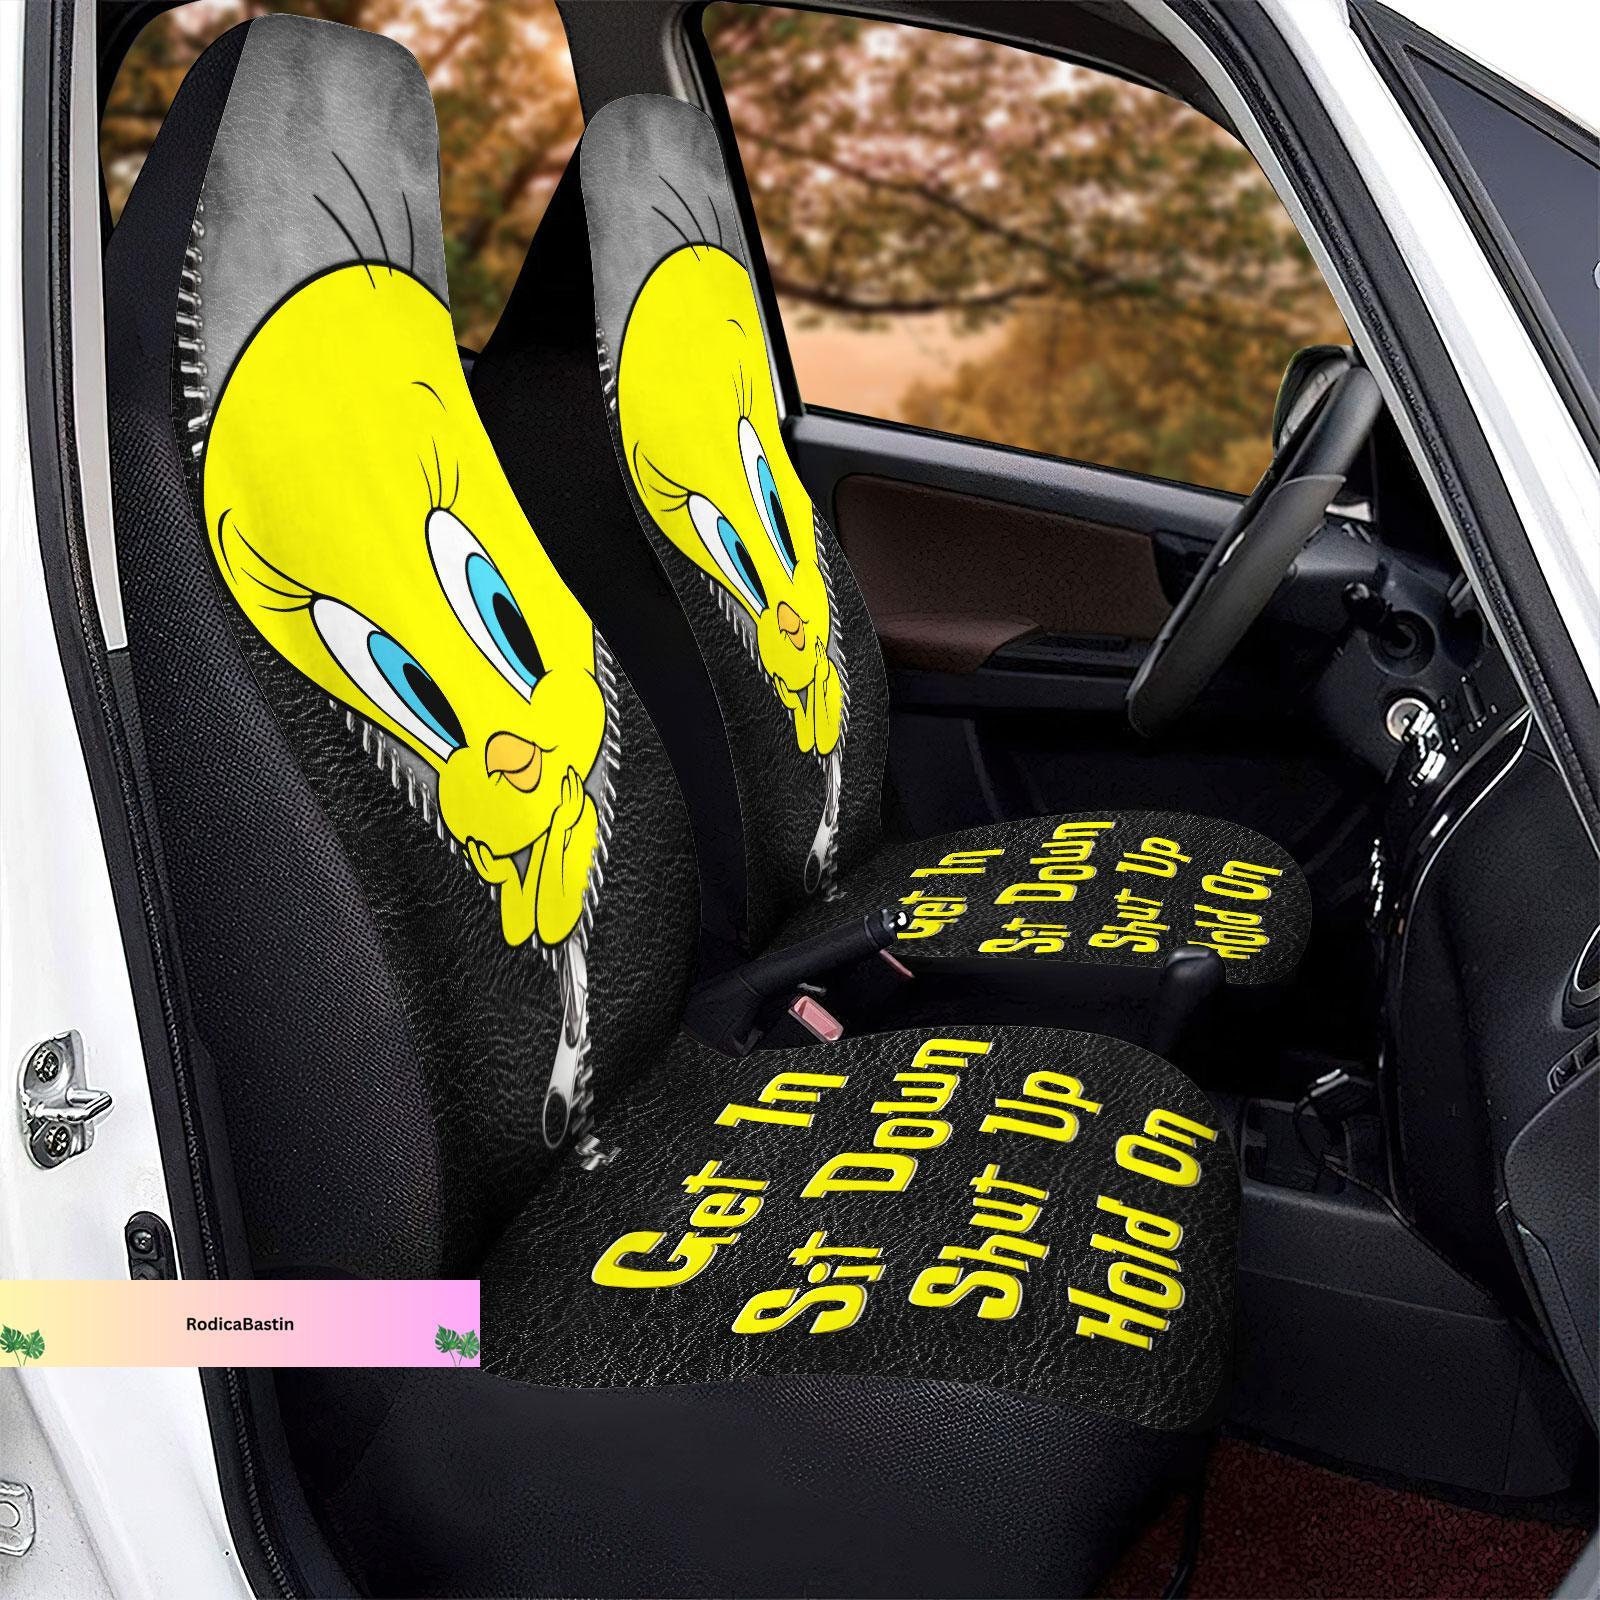 Discover Tweety Seat Cover, Tweety Carseat Cover, Tweety Bird Seat Protector